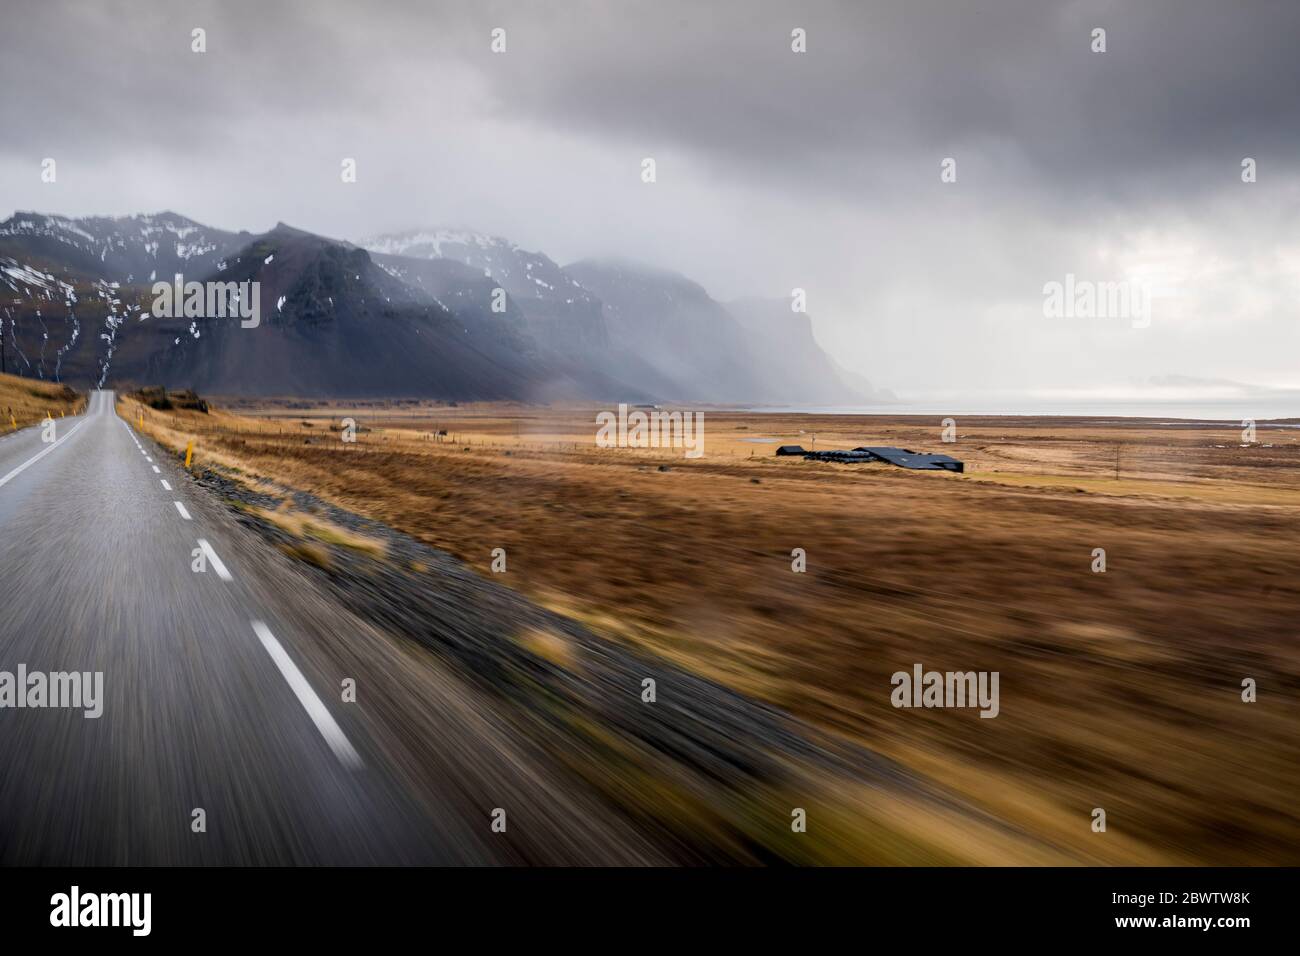 Iceland, Blurred motion of Route 1 highway Stock Photo